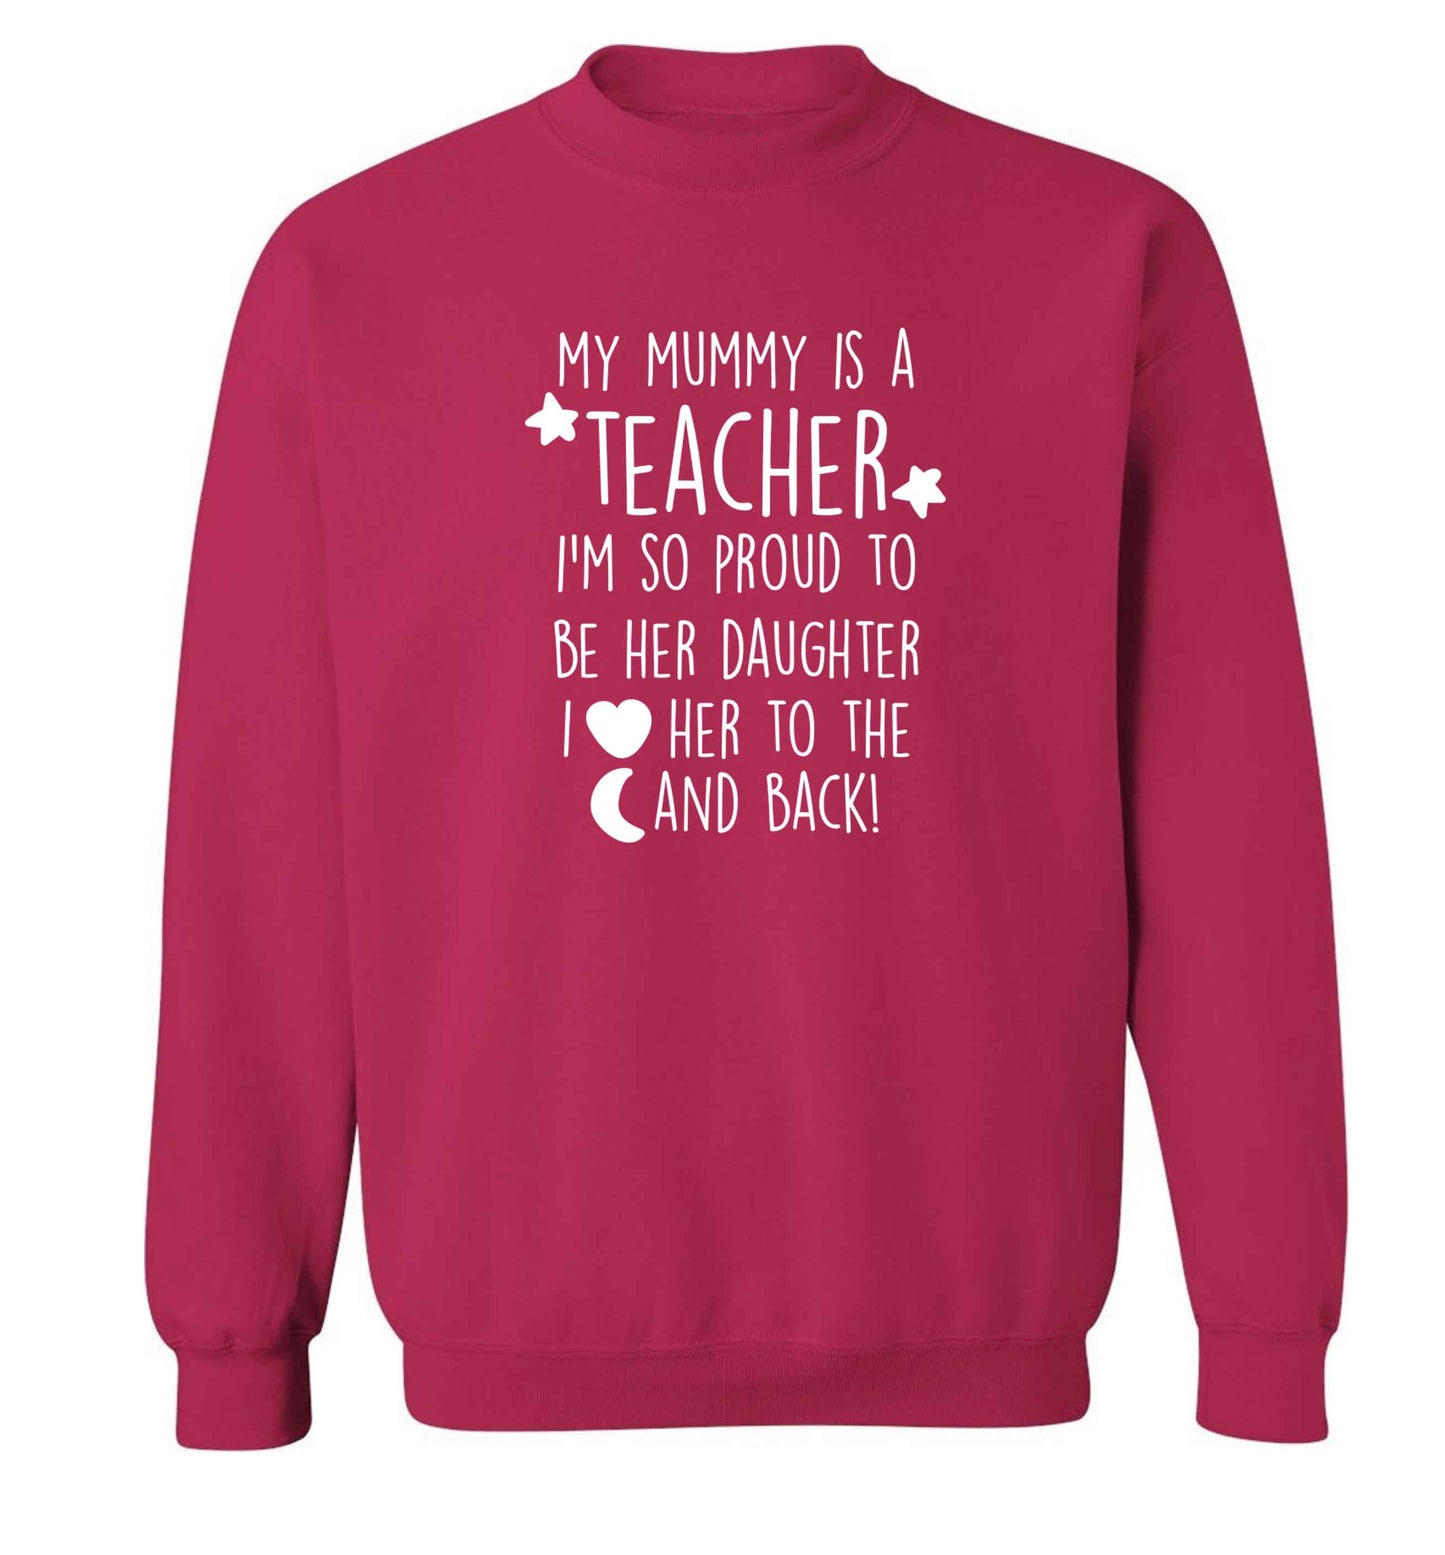 My mummy is a teacher I'm so proud to be her daughter I love her to the moon and back adult's unisex pink sweater 2XL